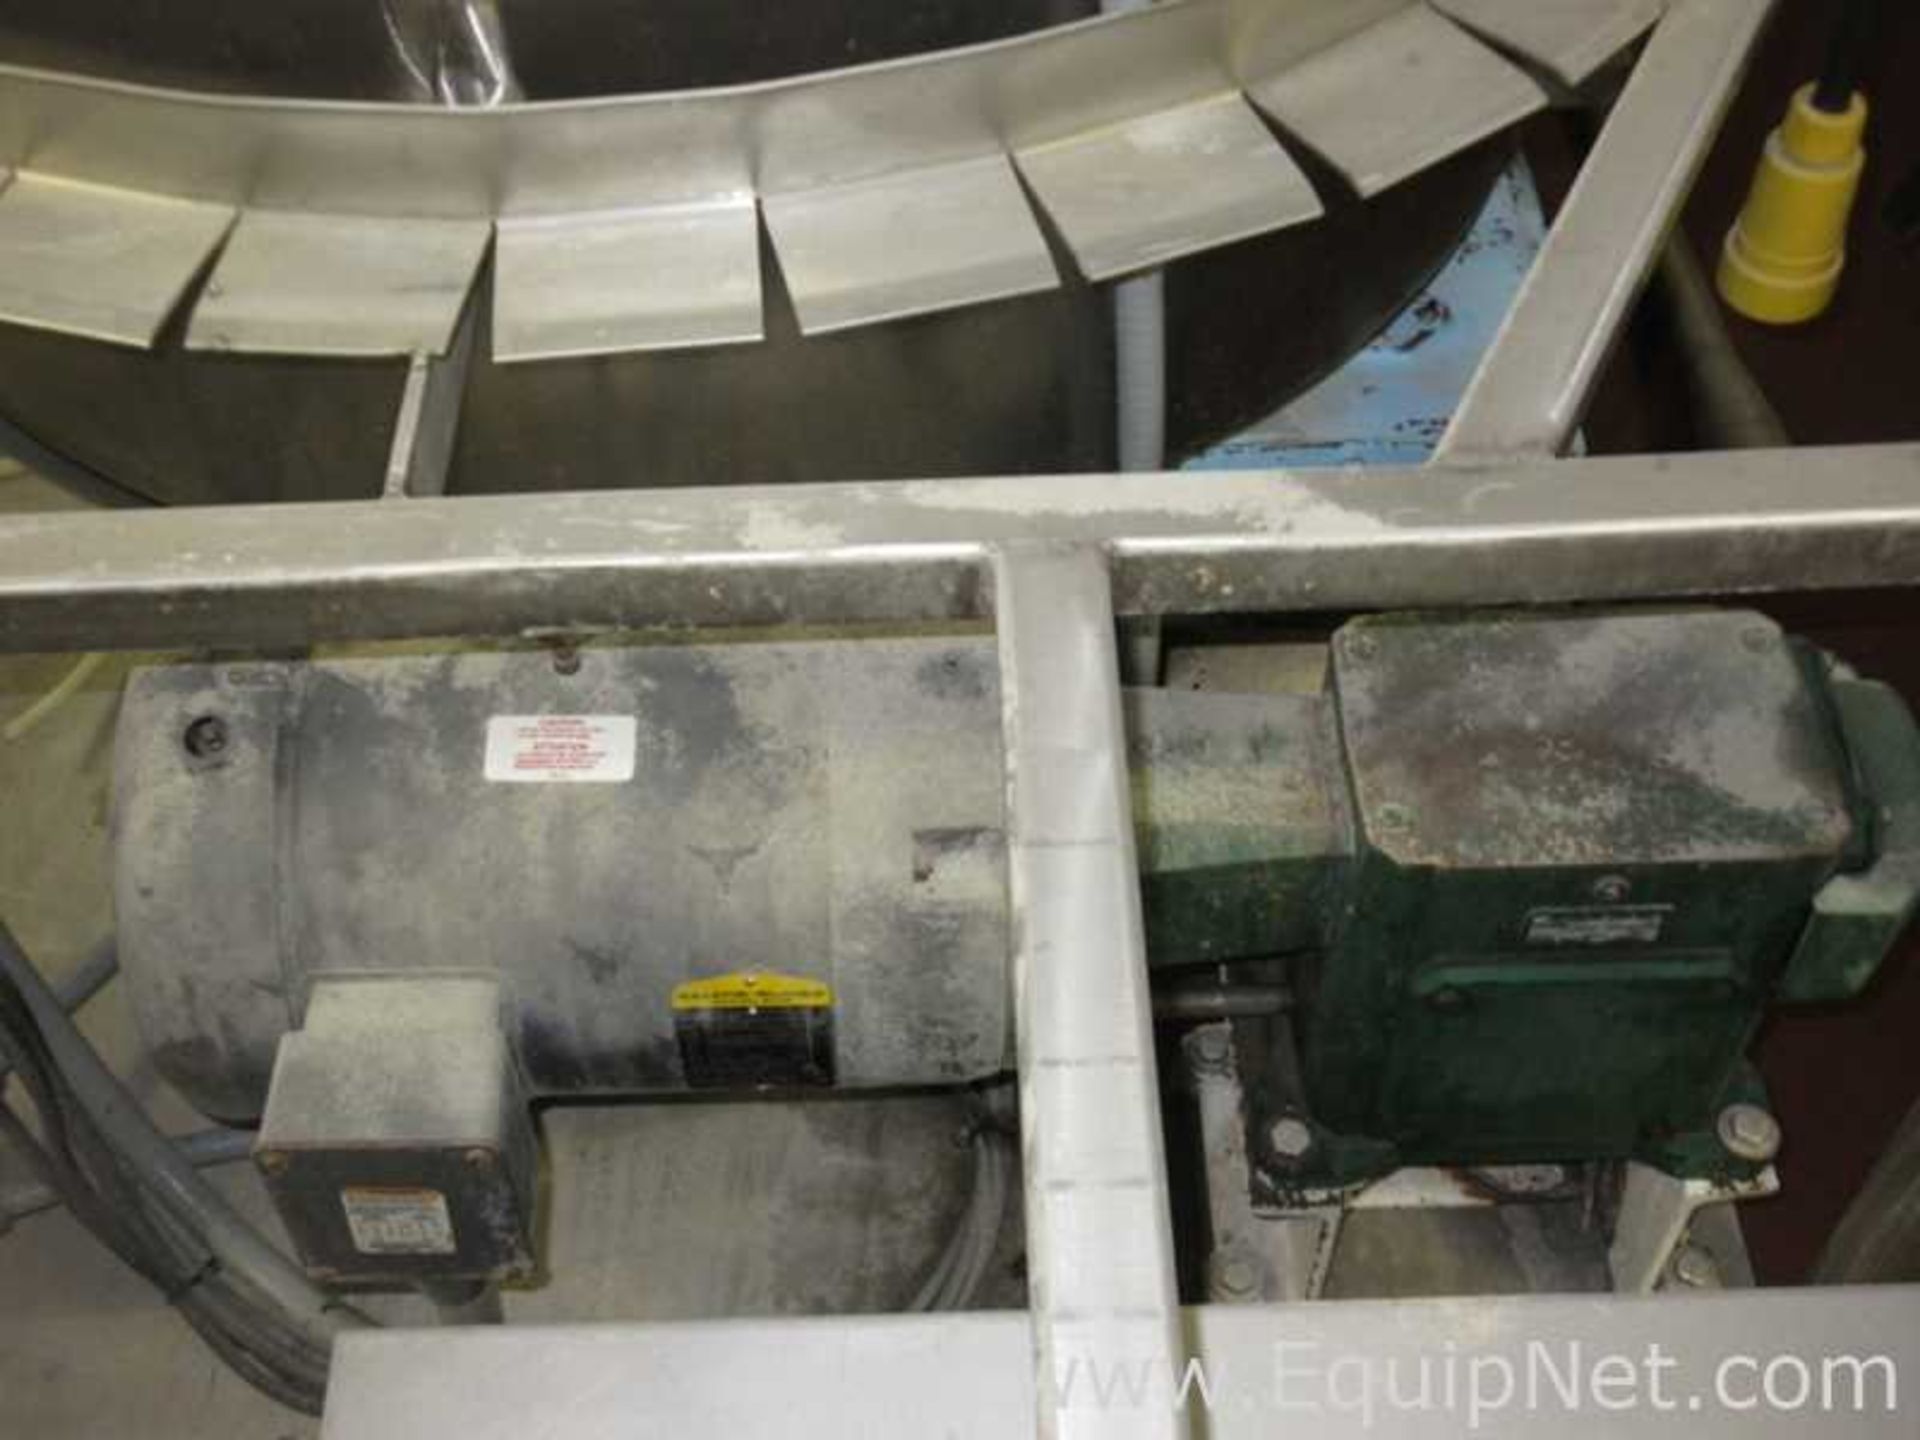 EQUIPNET LISTING #775954; REMOVAL COST: $1,828.00; DESCRIPTION: Approx. 300 Gallon Stainless Steel - Image 13 of 15